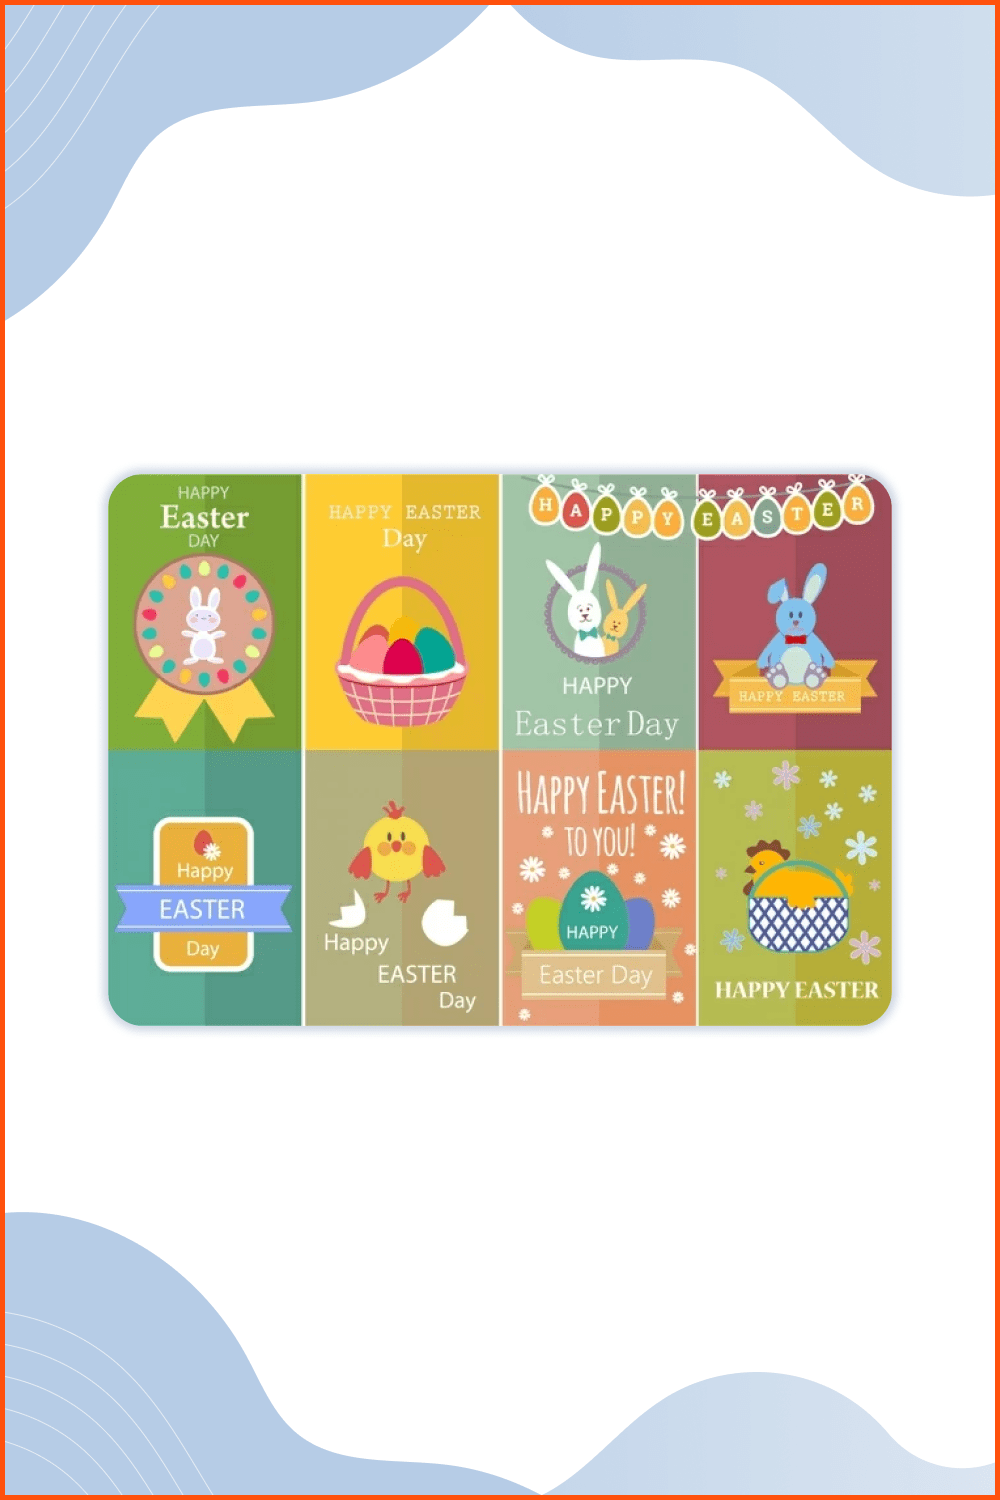 Easter card sets with cute colored design style.